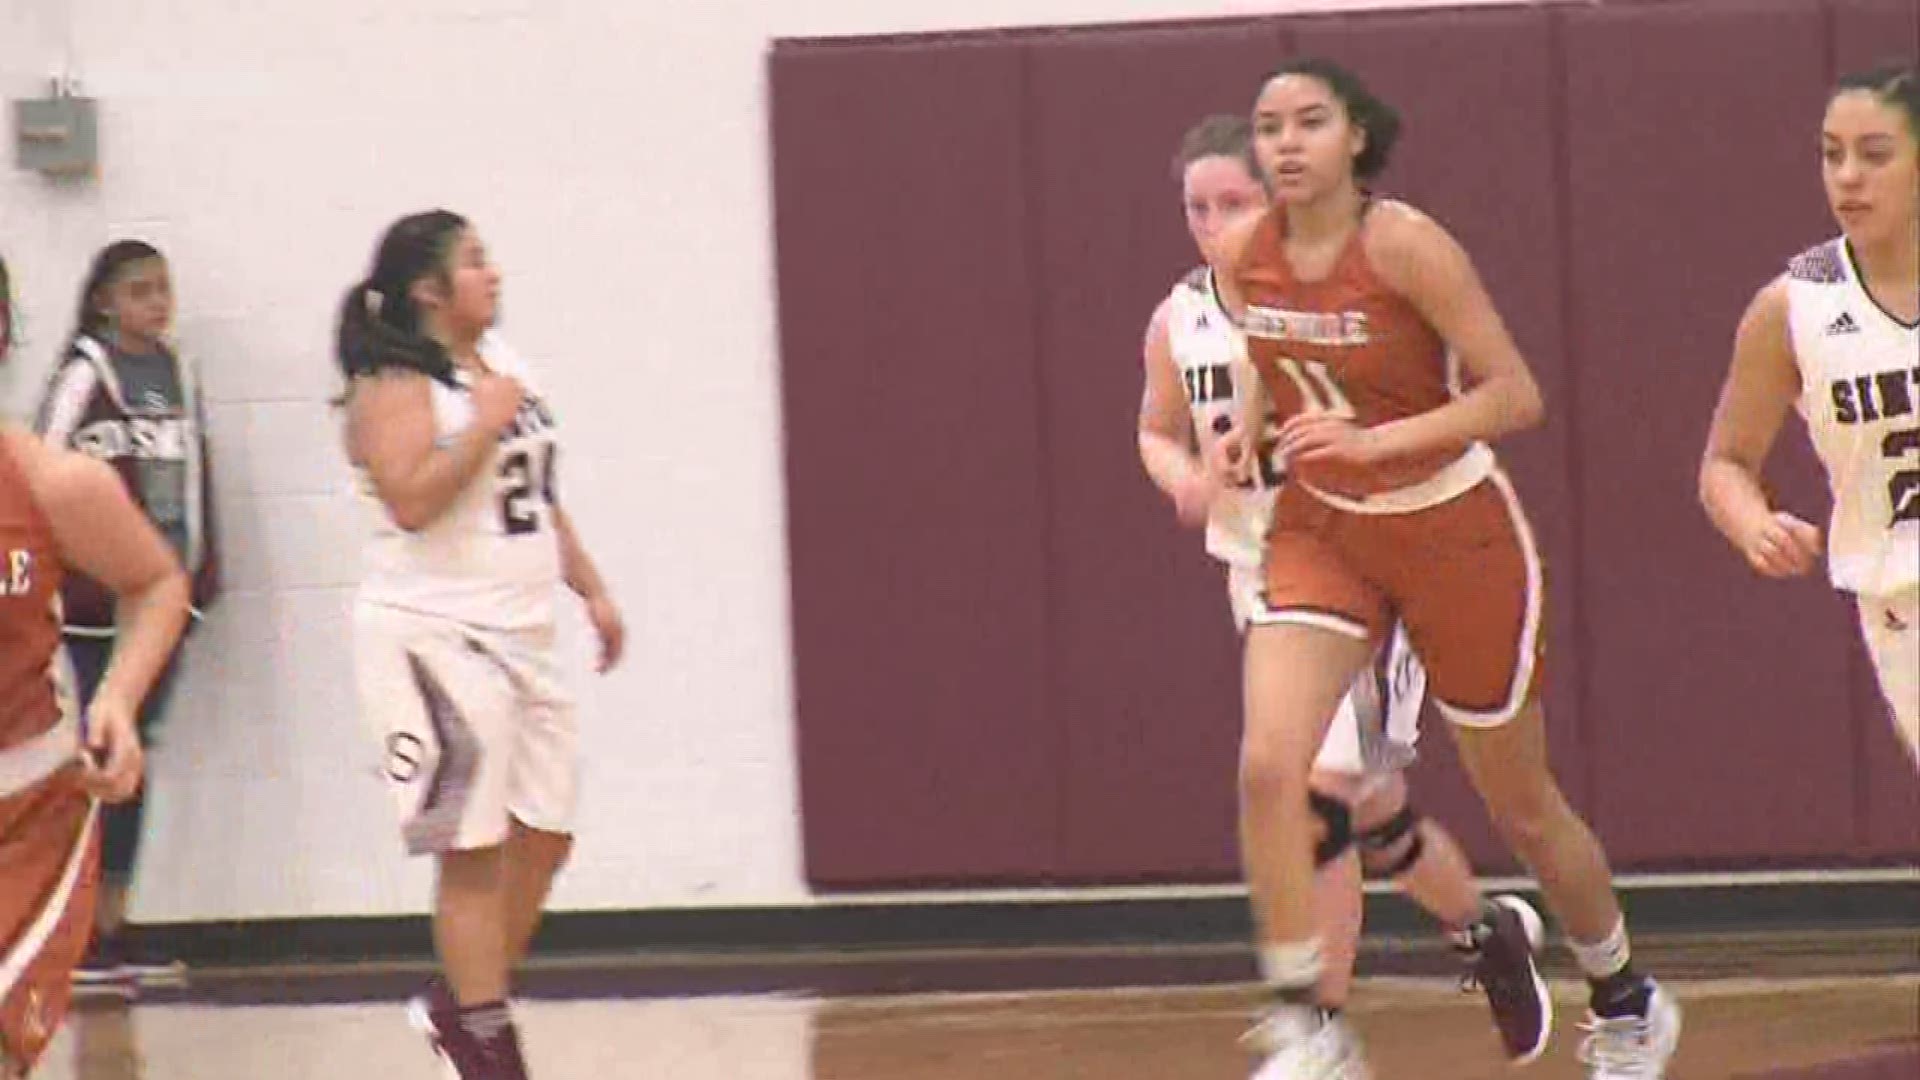 *Beeville girls get a record performance in win over Sinton (Game of the Week matchup) - Sinton boys hold off Beeville (Game of the Week matchup) - Ray boys edge Carroll - Carroll girls pull away from Ray